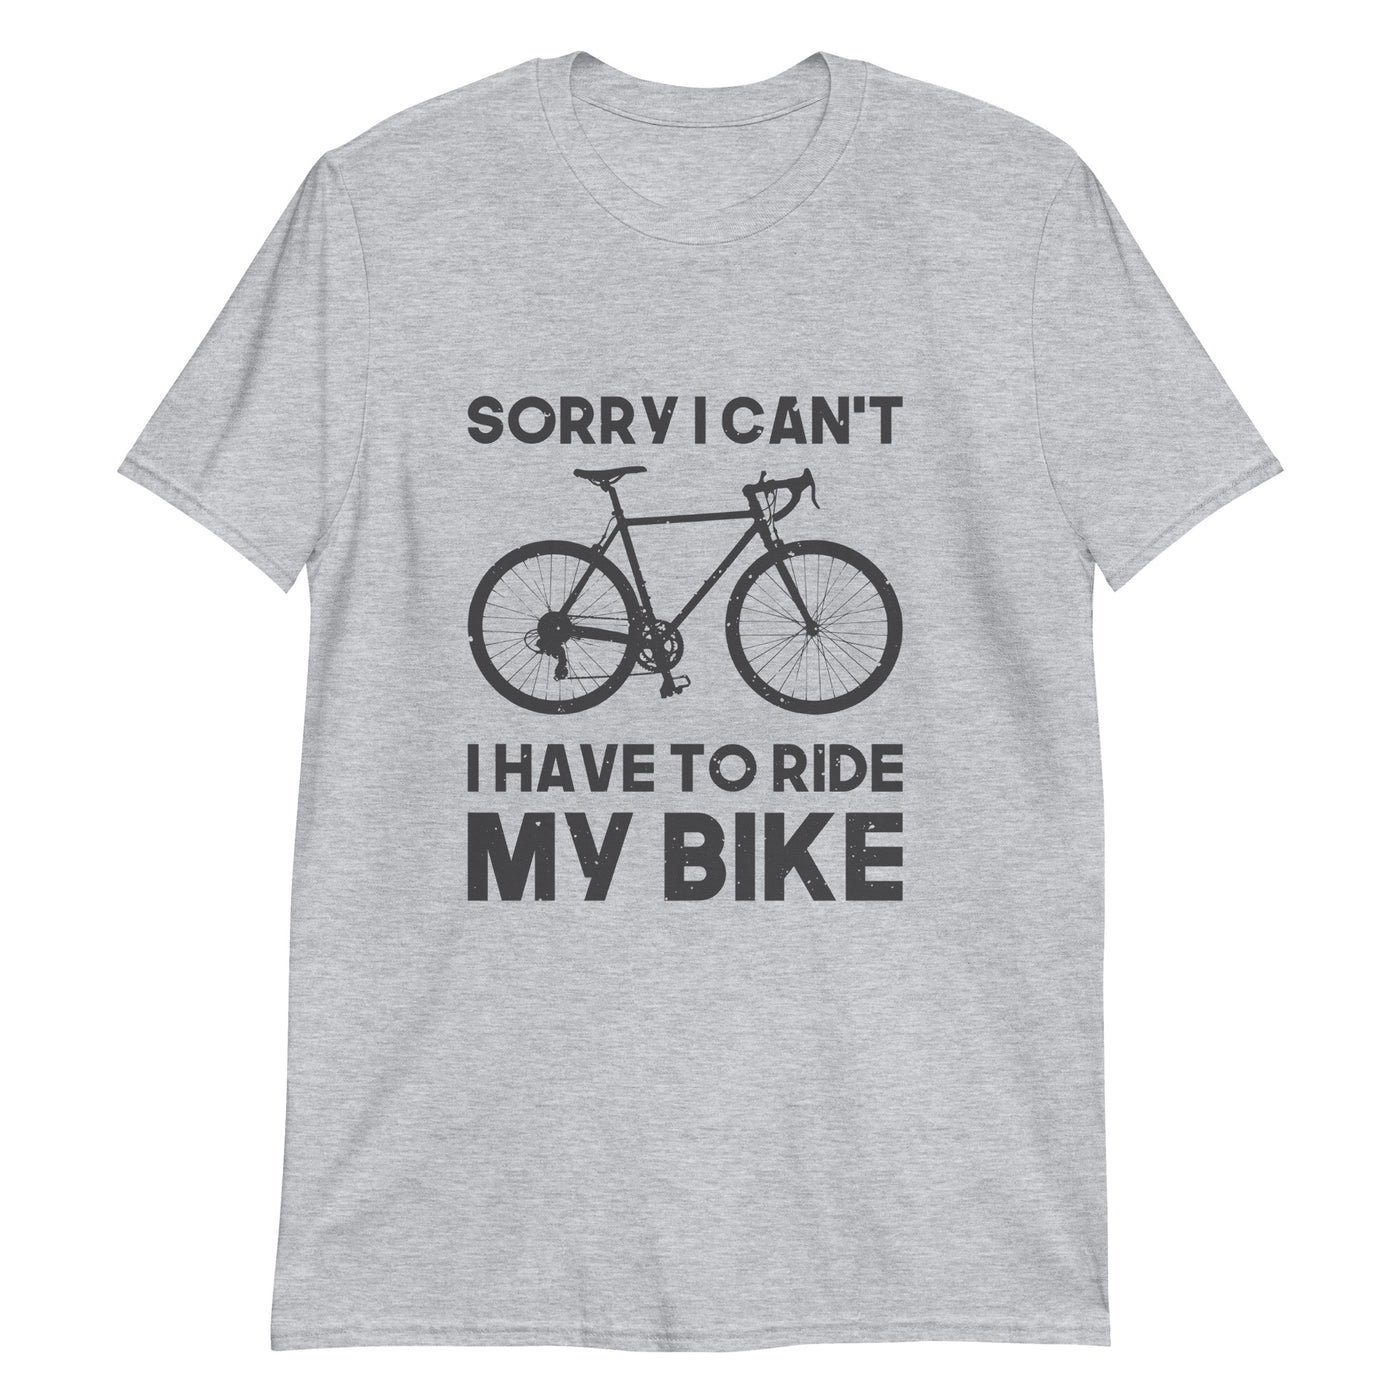 Sorry I can't, I have to ride my bike